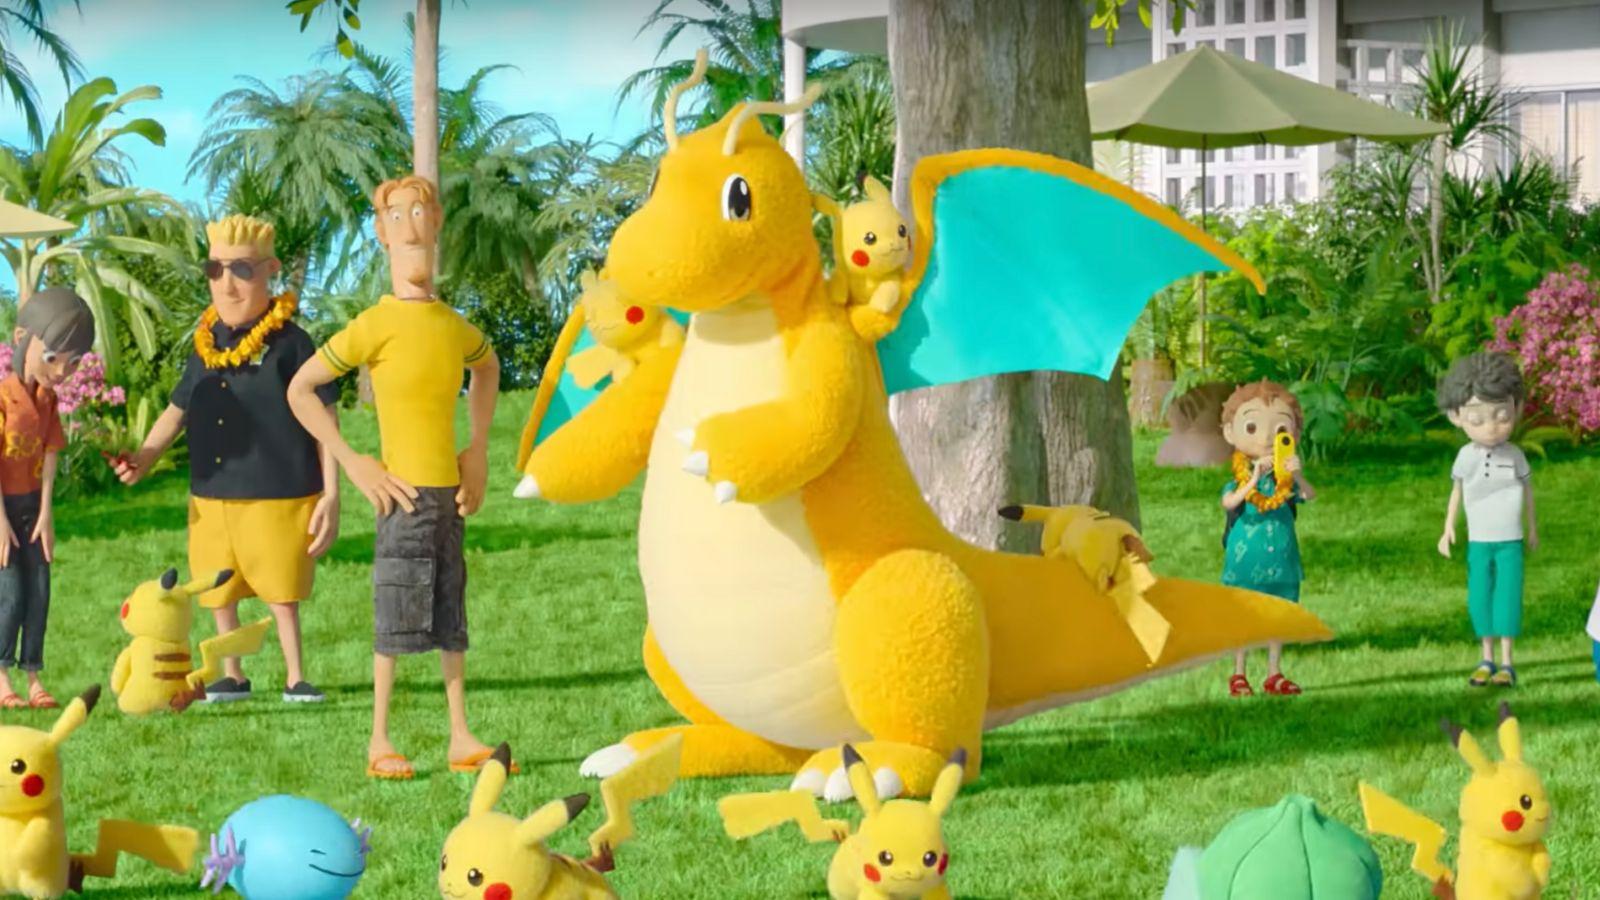 Clay Dragonite, Pikachu, Bulbasaur and other Pokemon frolicking in a frame from Netflix Pokemon Concierge series